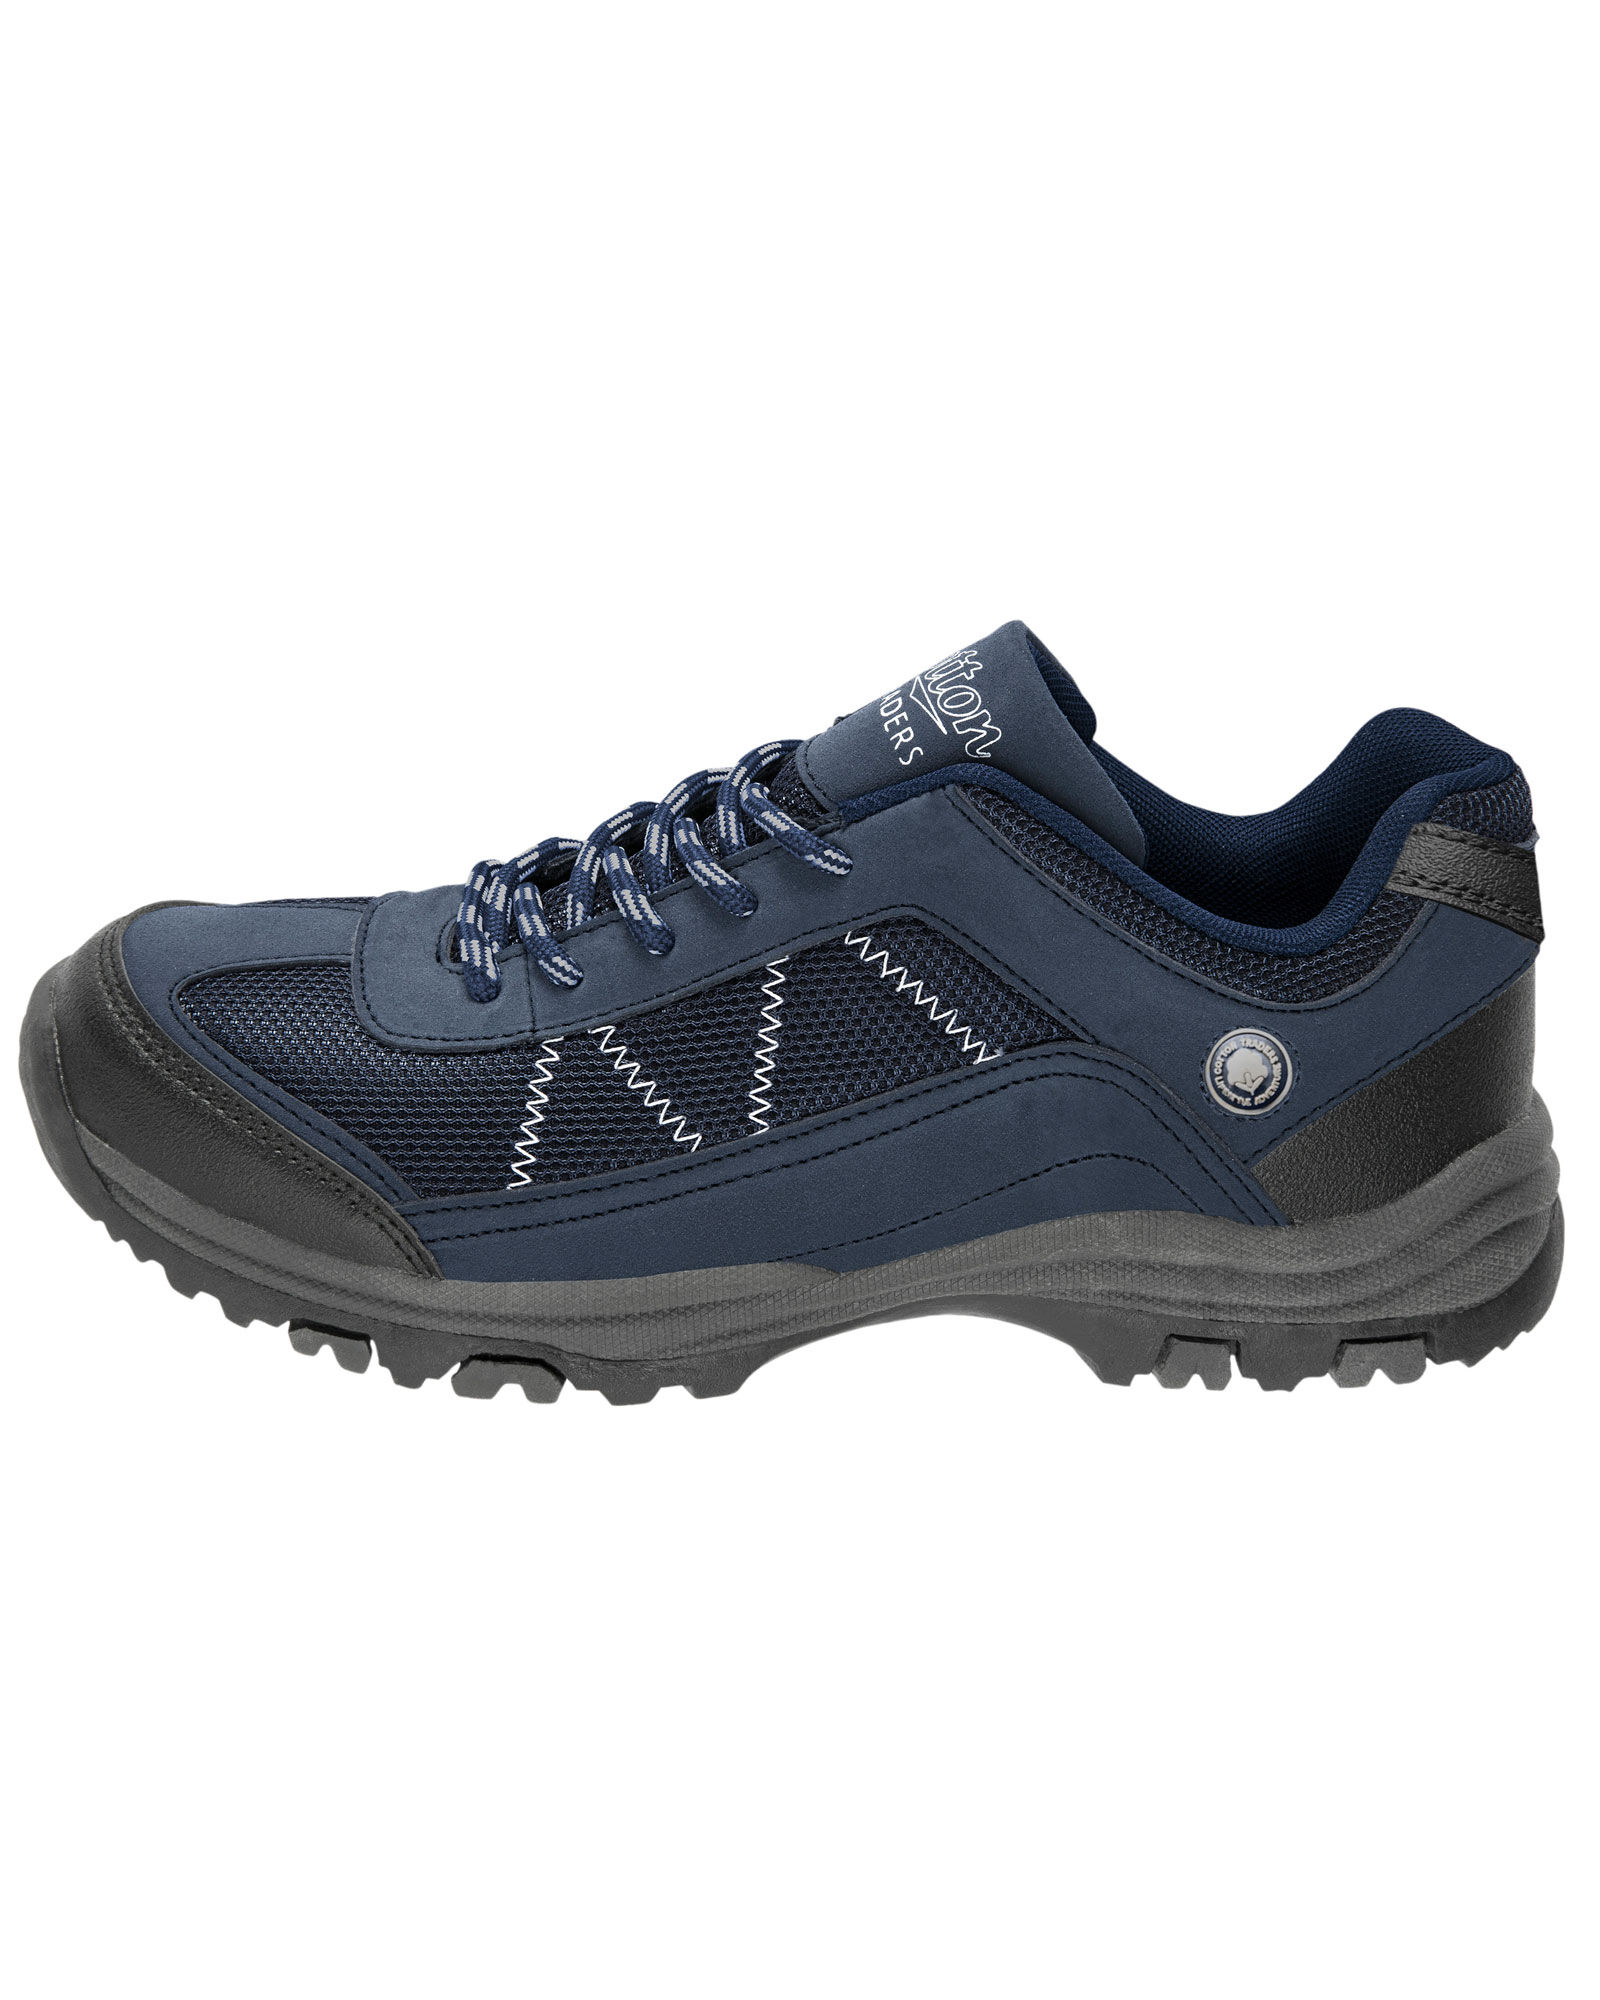 Lightweight Walking Shoes at Cotton Traders